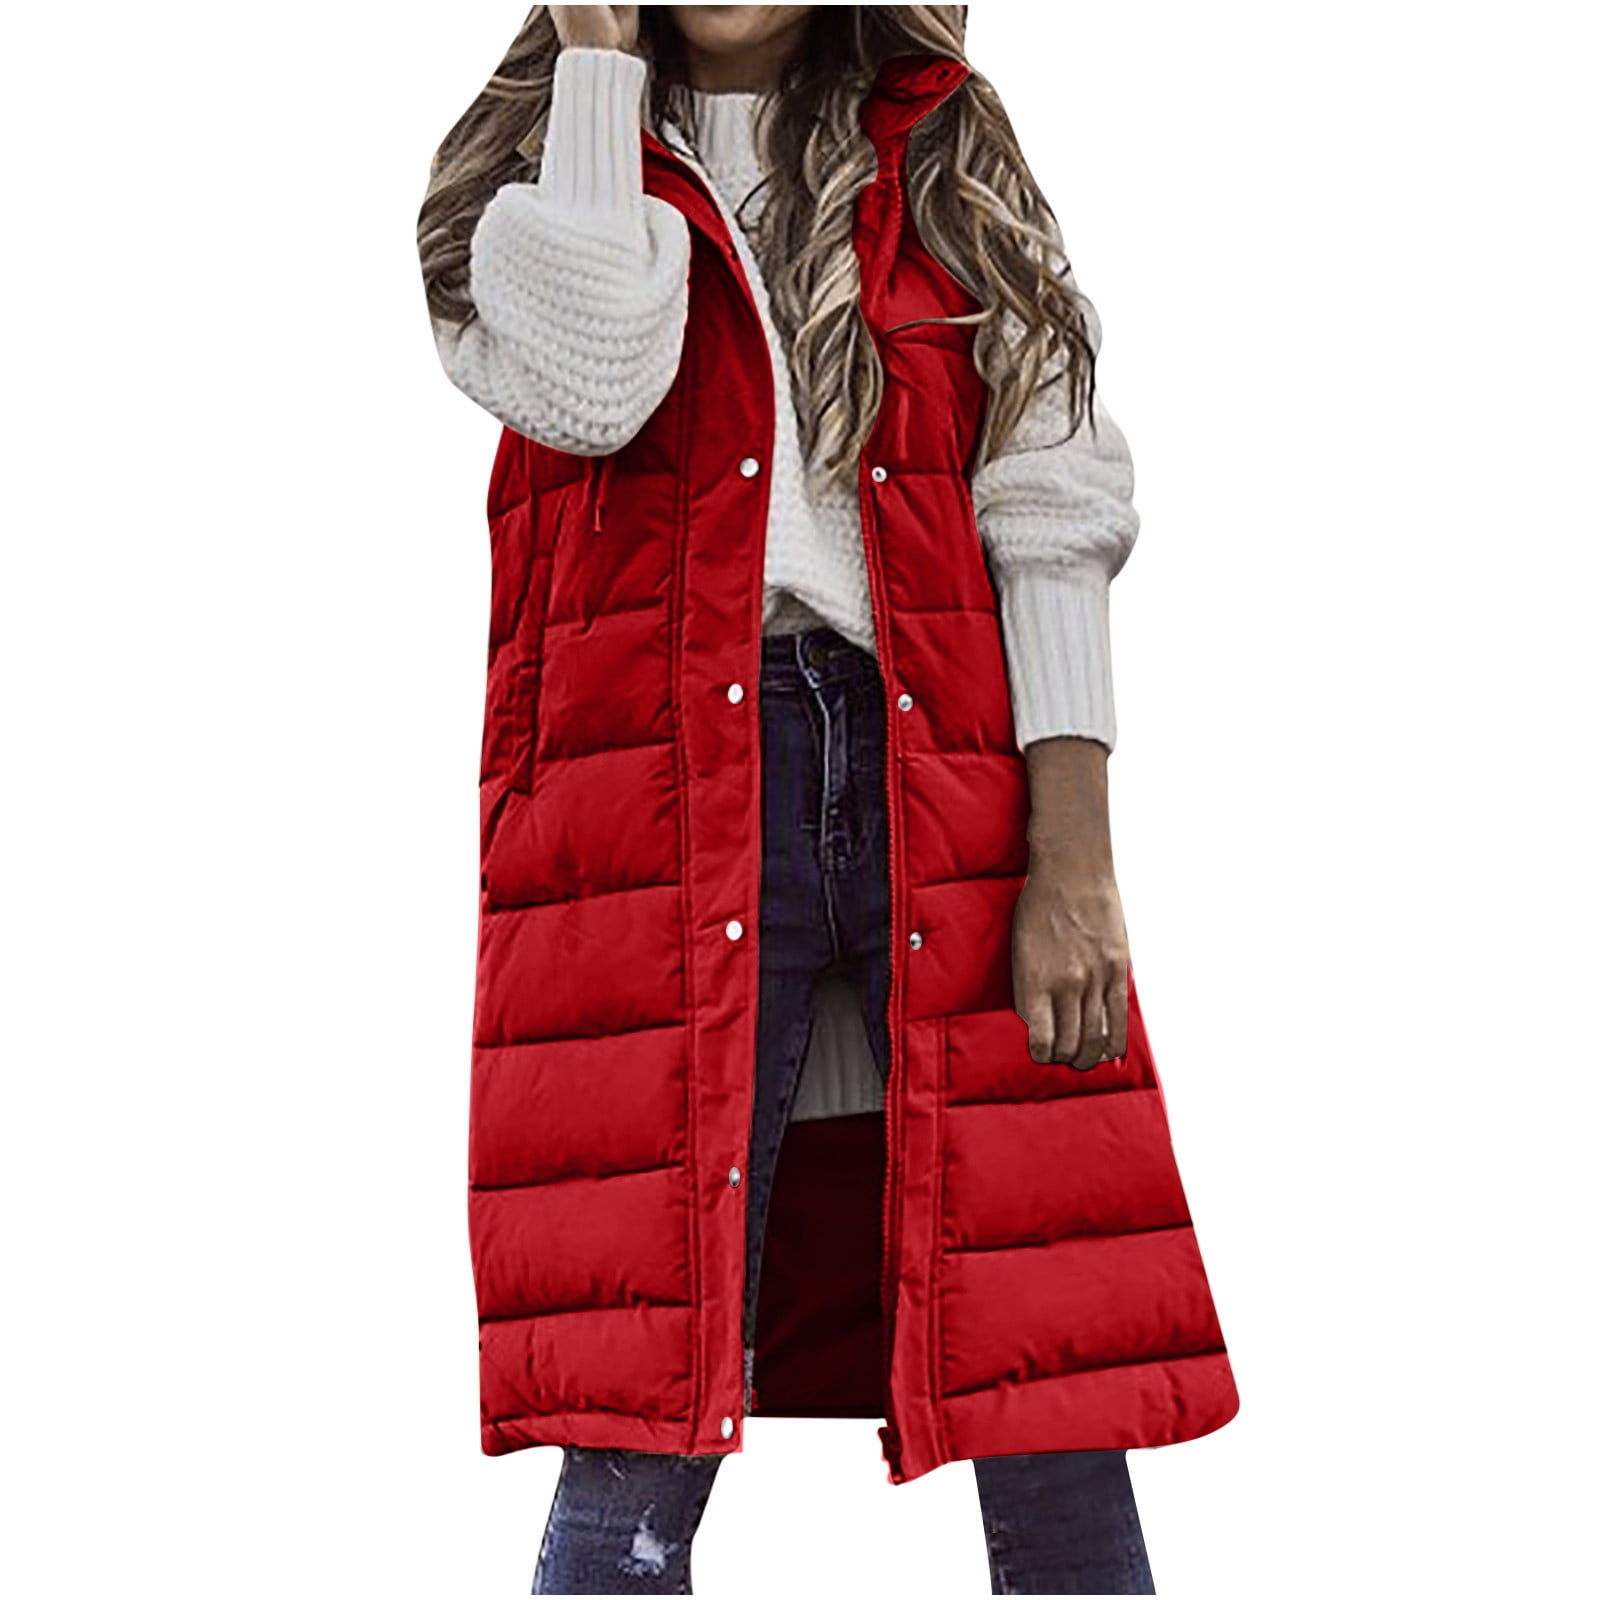 Hfyihgf Oversized Long Down Vest for Women Outdoor Coats with 